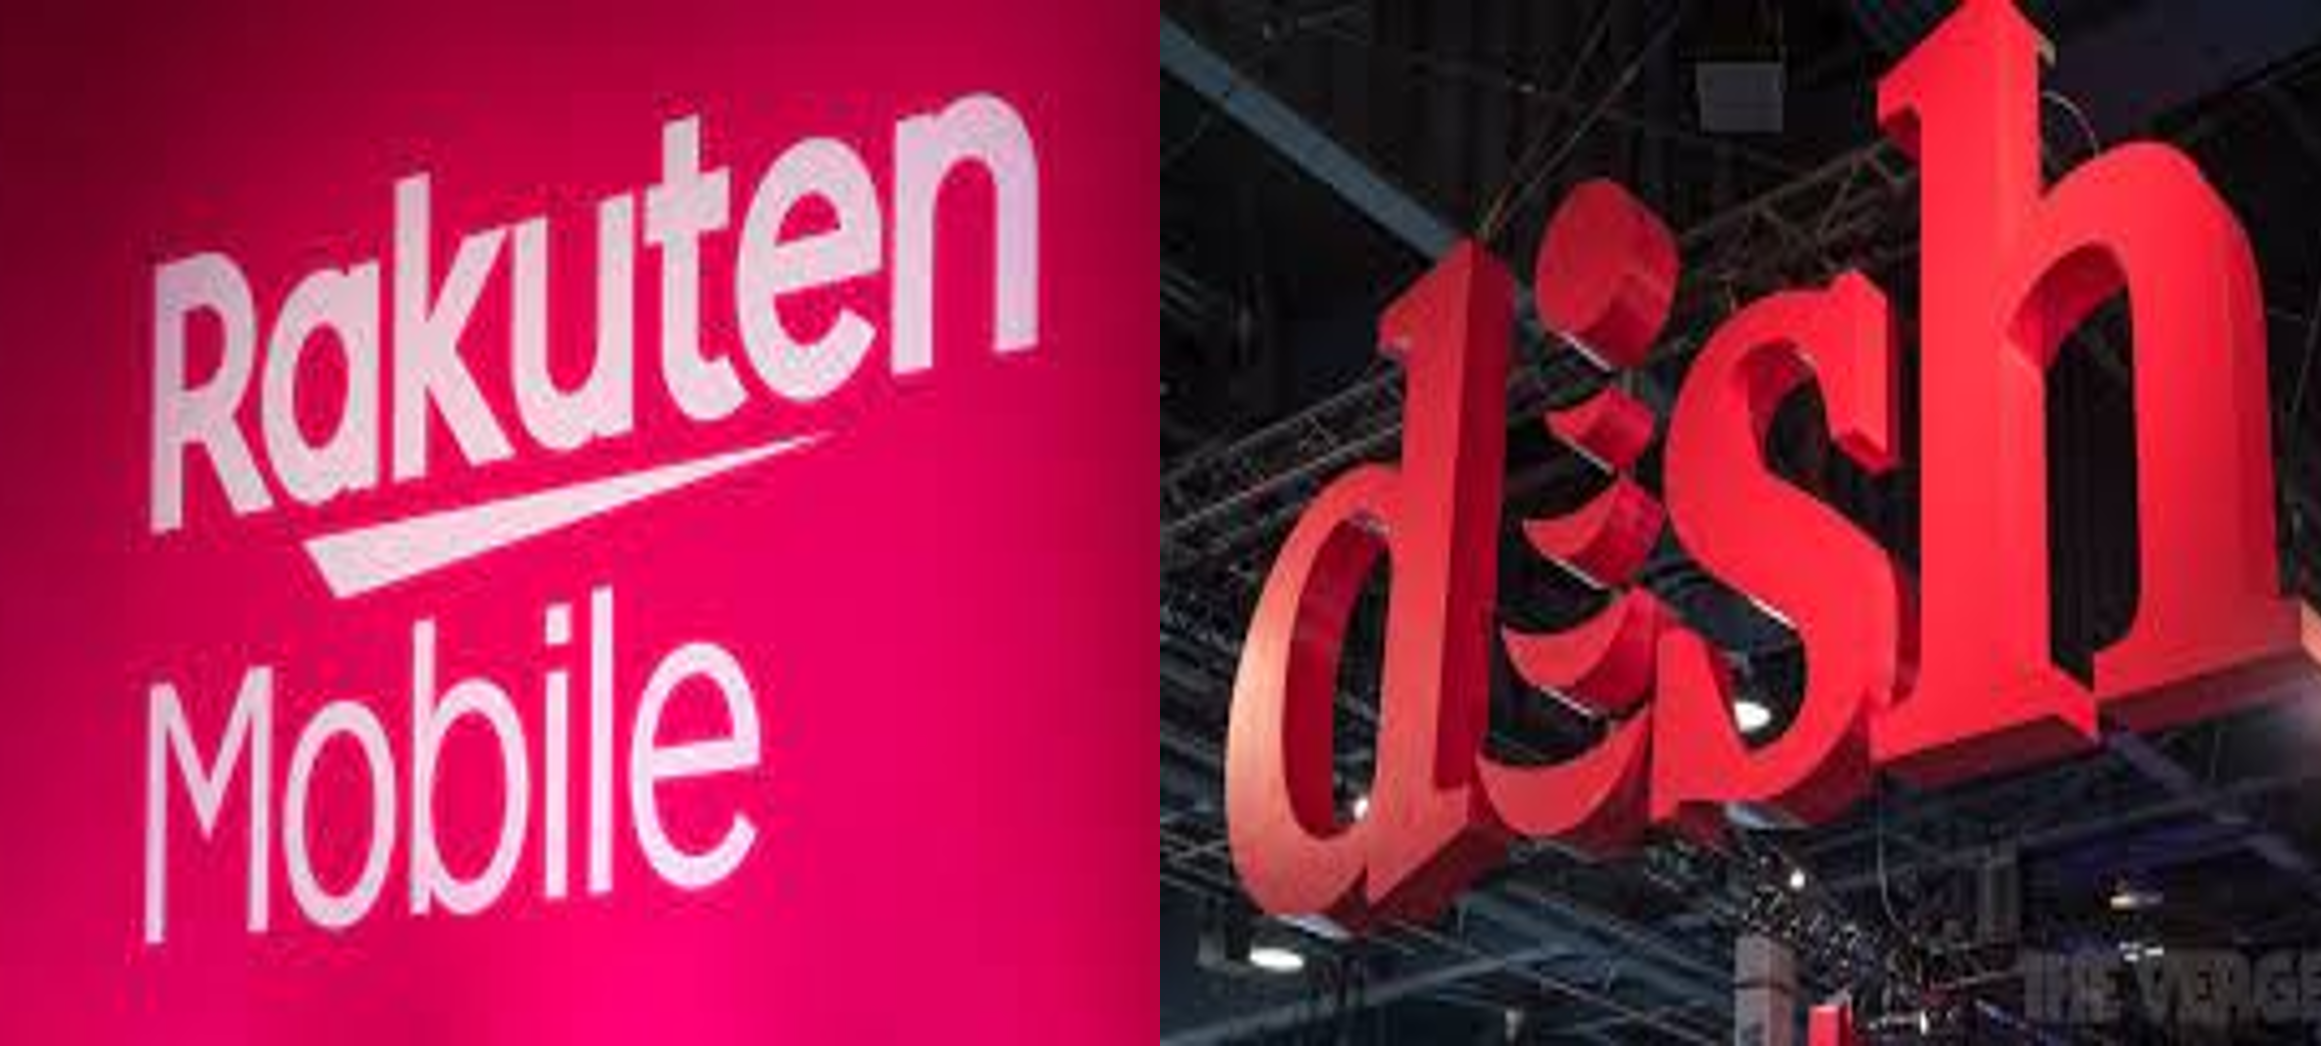 Rakuten and Dish – 2022 Will Be A Critical Year For Greenfield Networks